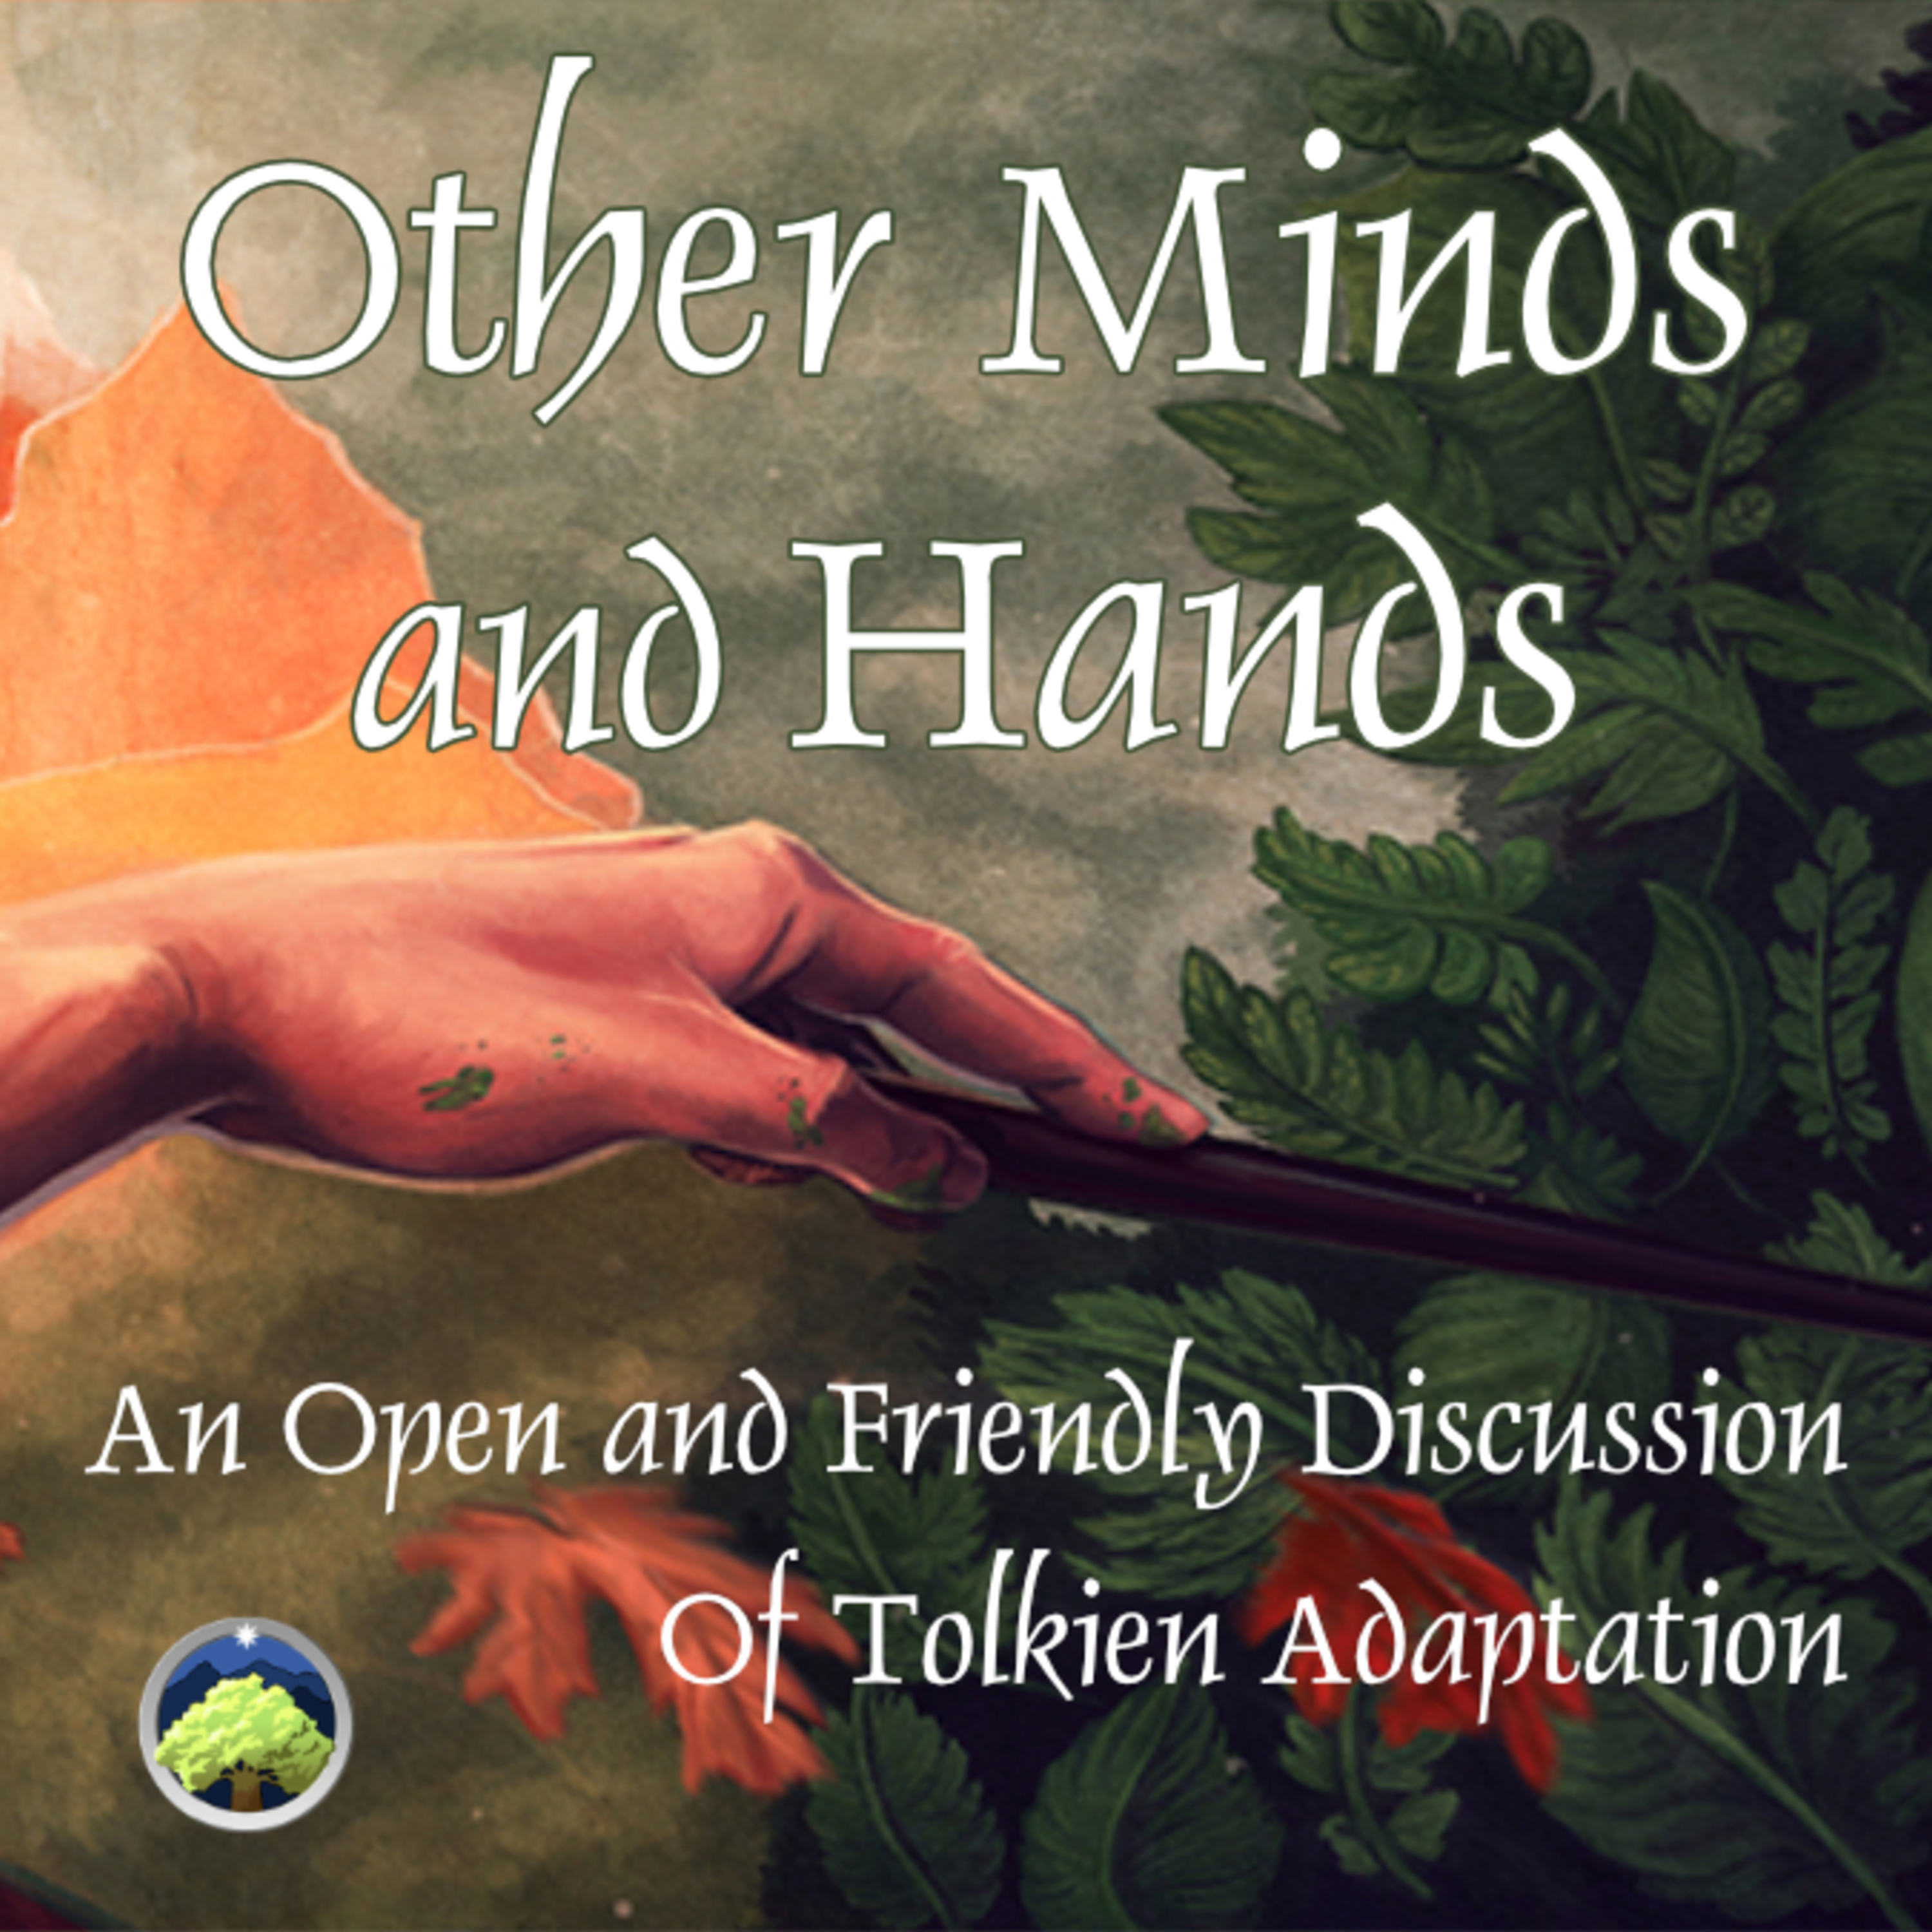 560: Other Minds and Hands, Episode 64